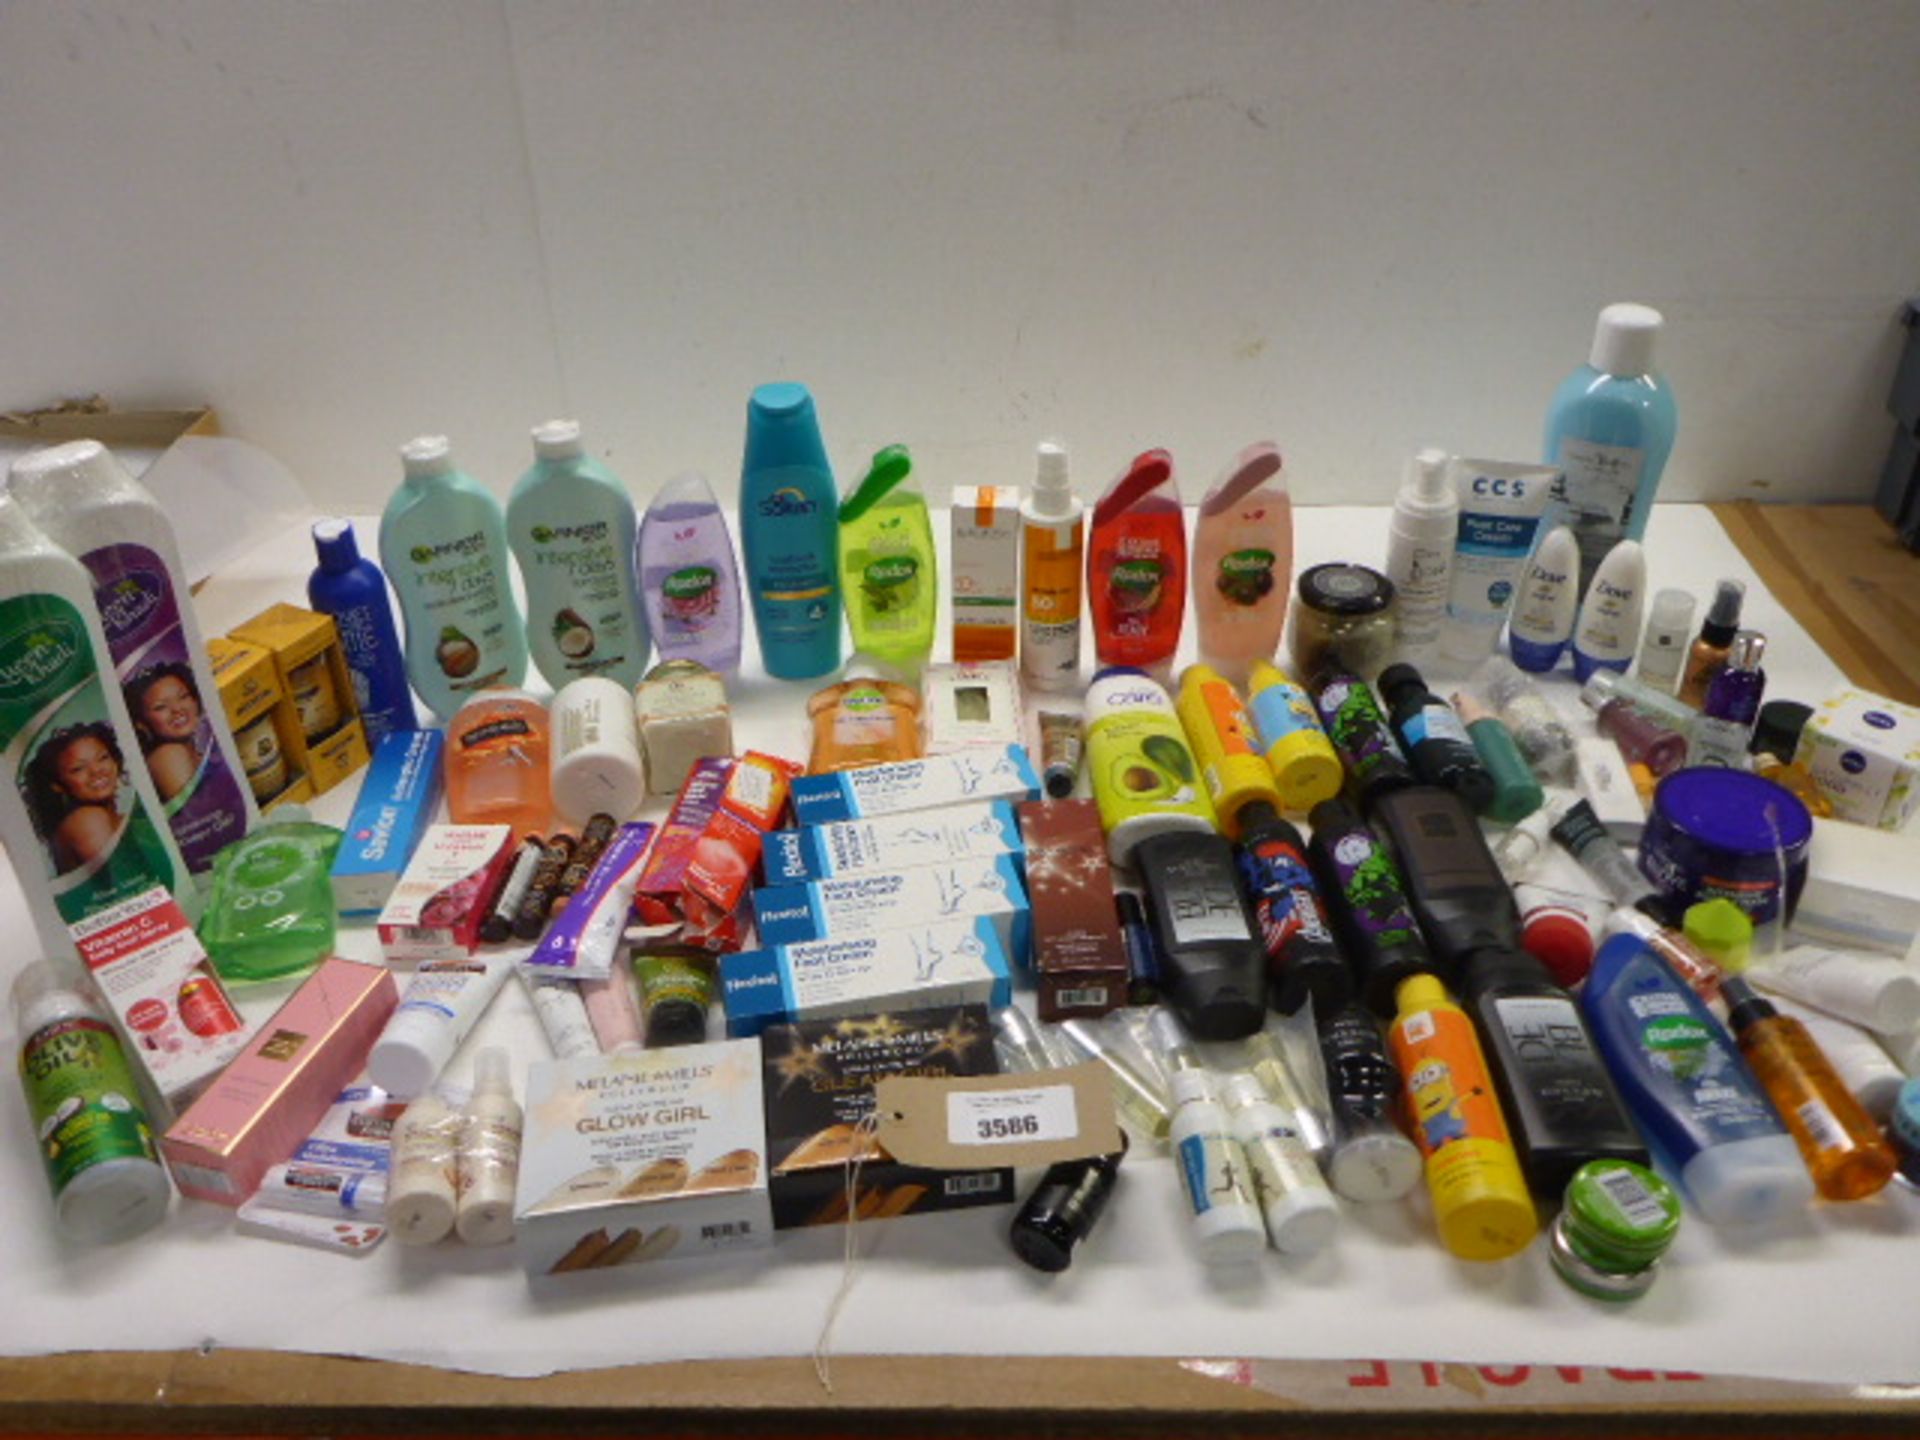 Large bag of toiletries including lotions, face & body wash, deodorant, deep heat cream, Oral spray,